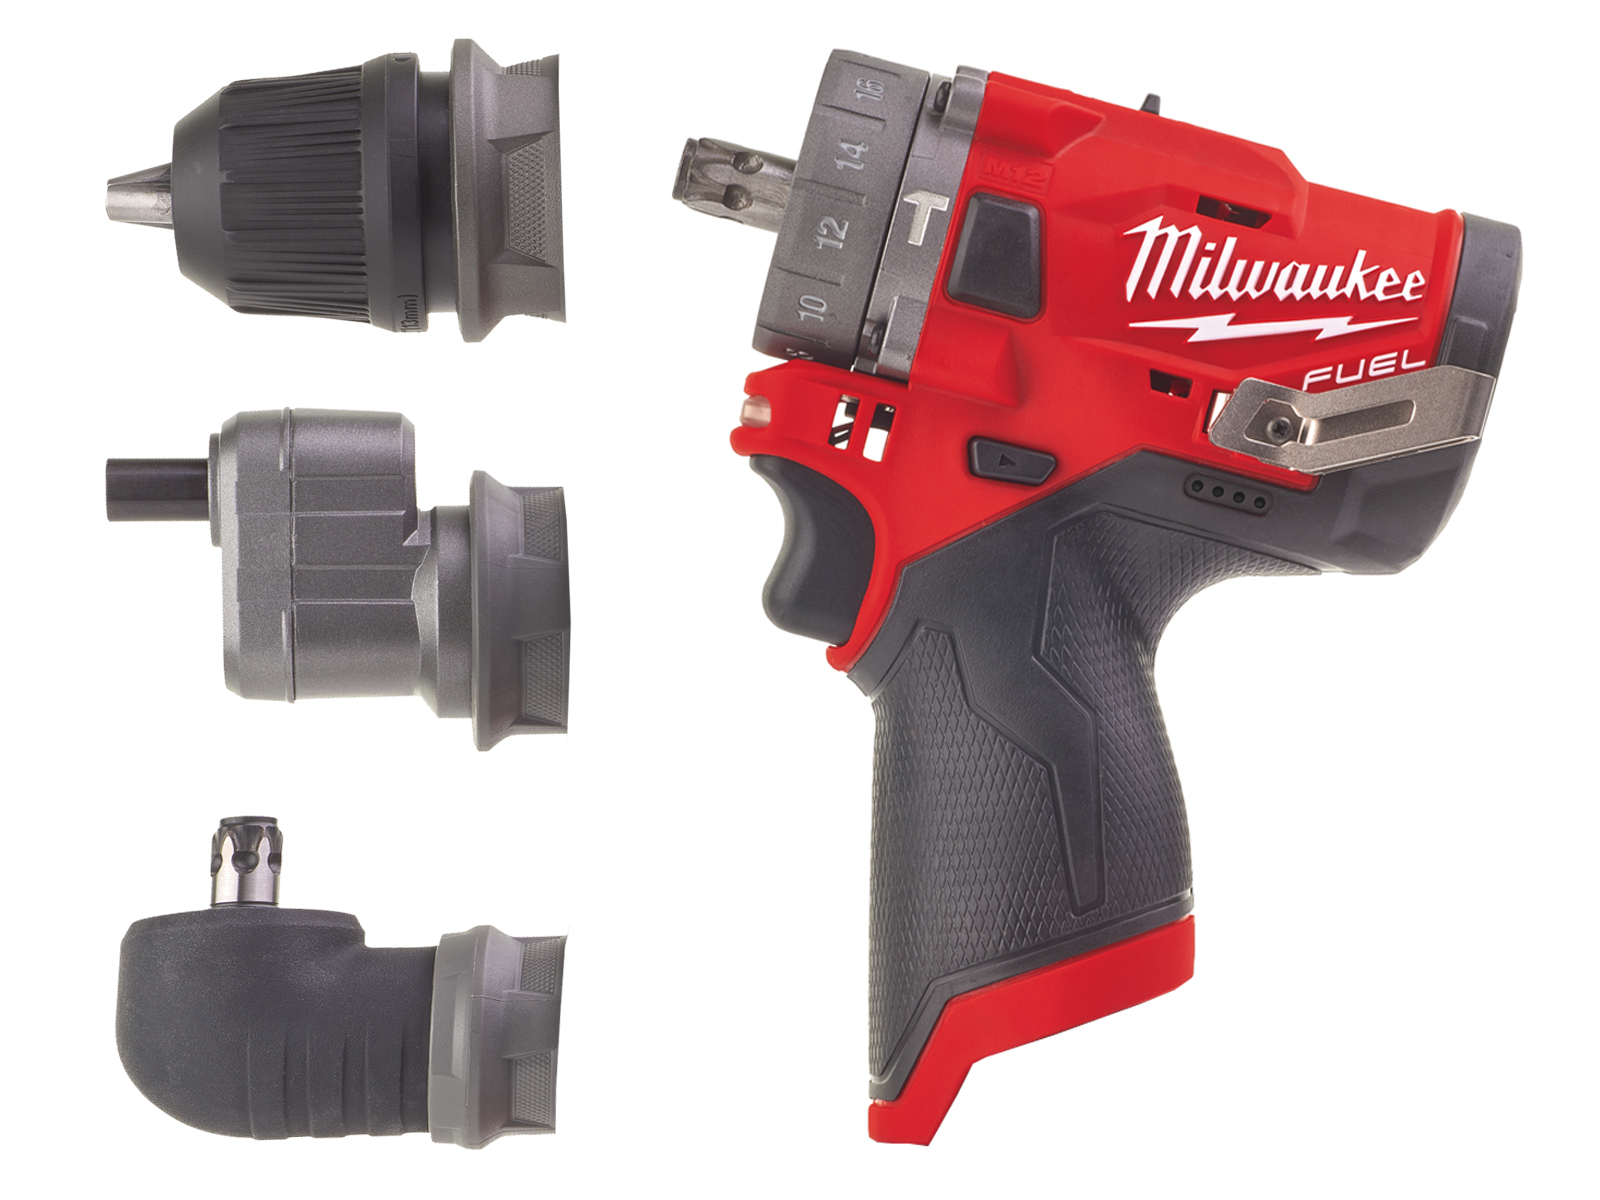 Milwaukee M12FPDX 12V Fuel Sub Compact Percussion Drill (Combi Drill) With Removable Chuck - Body and Attachments Only